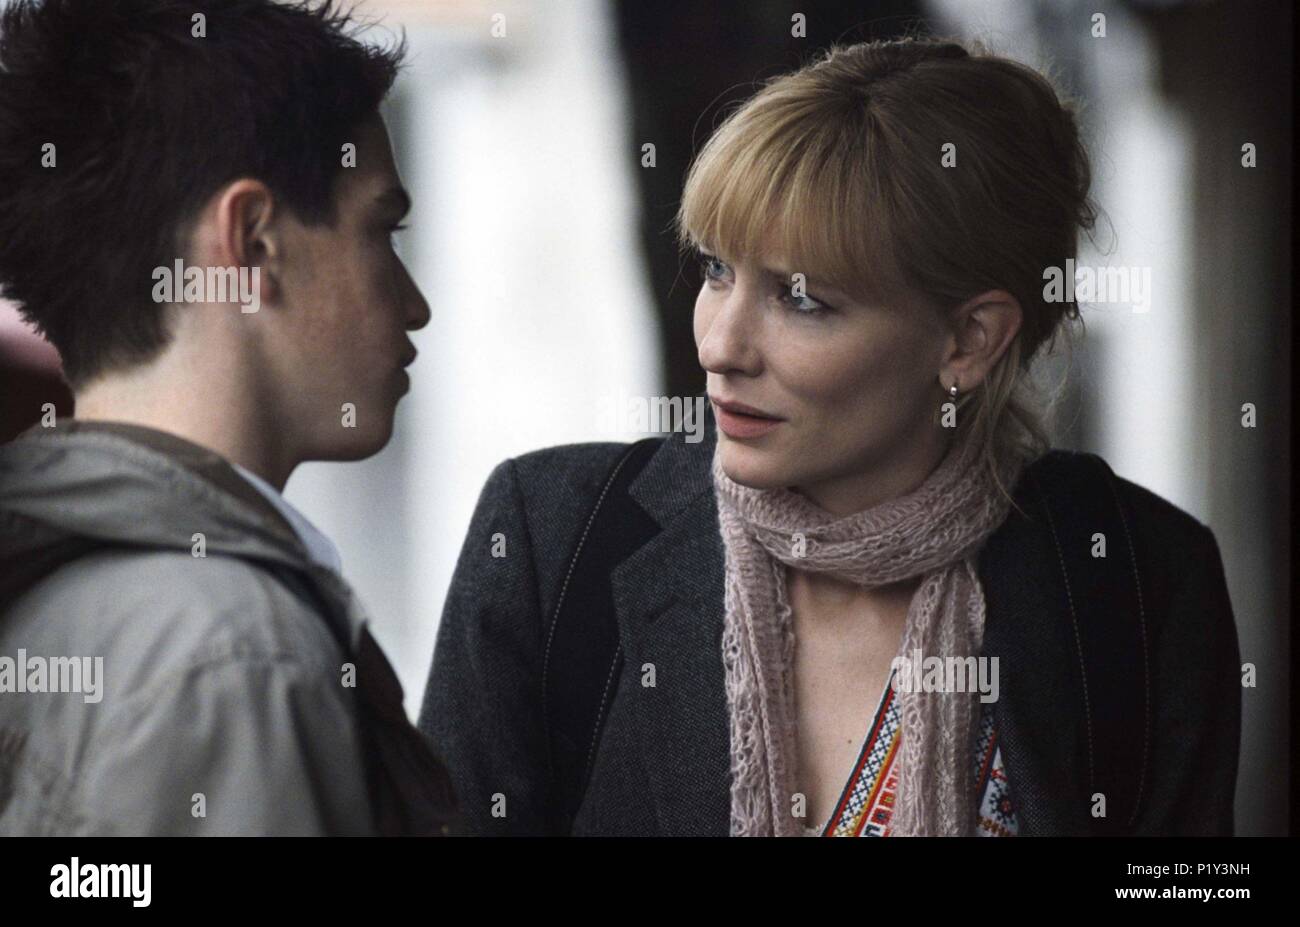 Original Film Title: NOTES ON A SCANDAL.  English Title: NOTES ON A SCANDAL.  Film Director: RICHARD EYRE.  Year: 2006.  Stars: CATE BLANCHETT; ANDREW SIMPSON. Credit: FOX SEARCHLIGHT PICTURES / COOTE, CLIVE / Album Stock Photo